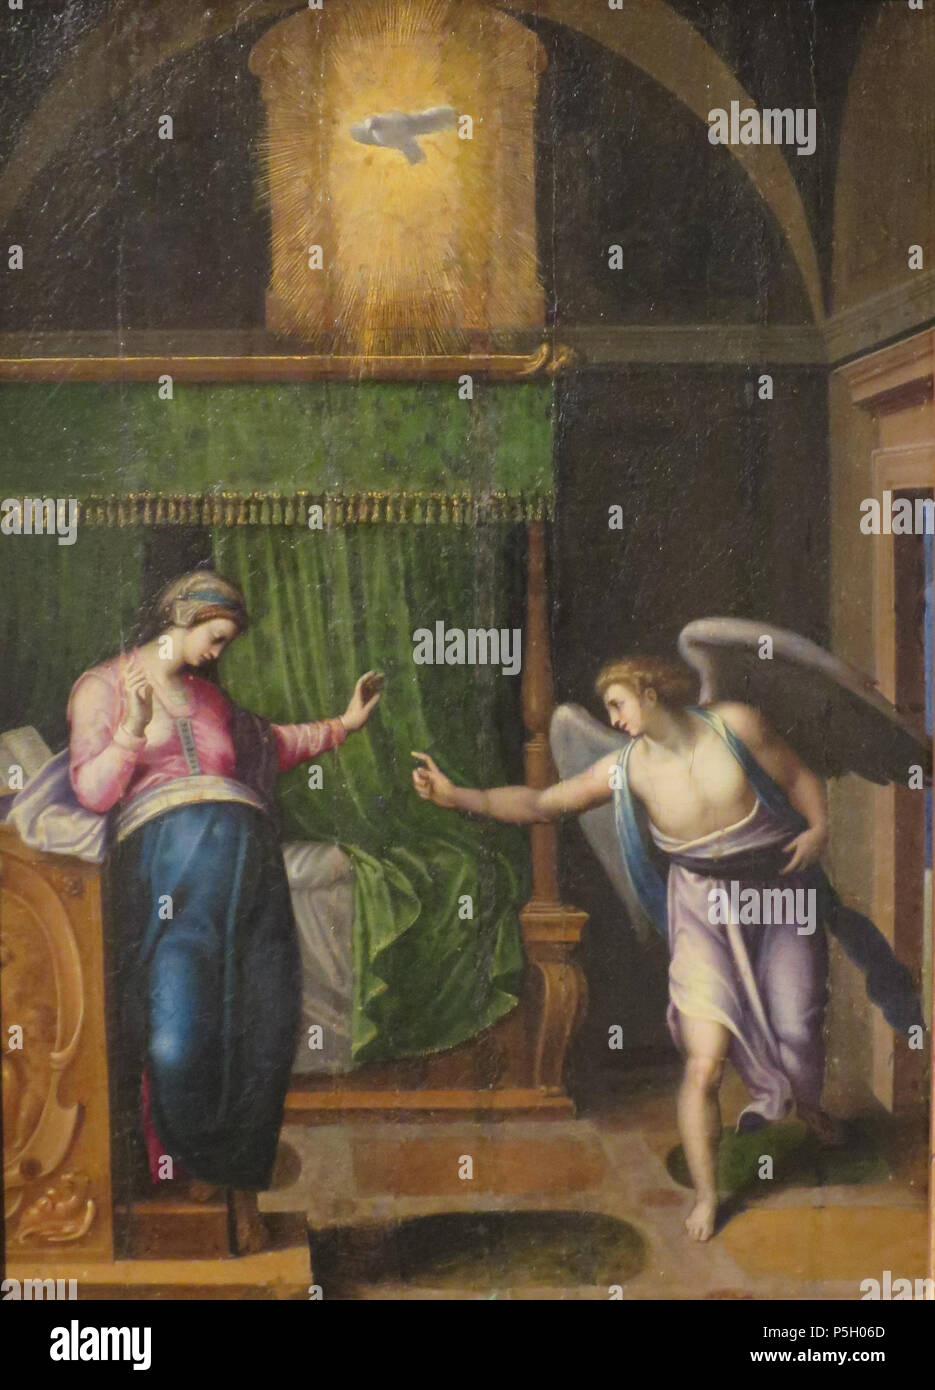 N/A. The Annunciation . 16th century.    Attributed to Marcello Venusti  (1512/1515–1579)     Alternative names Mazzo di Valtellina  Description Italian painter and fresco painter  Date of birth/death between 1512 and 1515 14 October 1579  Location of birth/death Como Rome  Work period from 1550 until 1579  Work location Rome  Authority control  : Q2716659 VIAF:45105084 ISNI:0000 0000 6634 7155 ULAN:500004451 LCCN:nr91028737 WGA:VENUSTI, Marcello WorldCat 4 'The Annunciation' attributed to Marcello Venusti, Lowe Art Museum Stock Photo